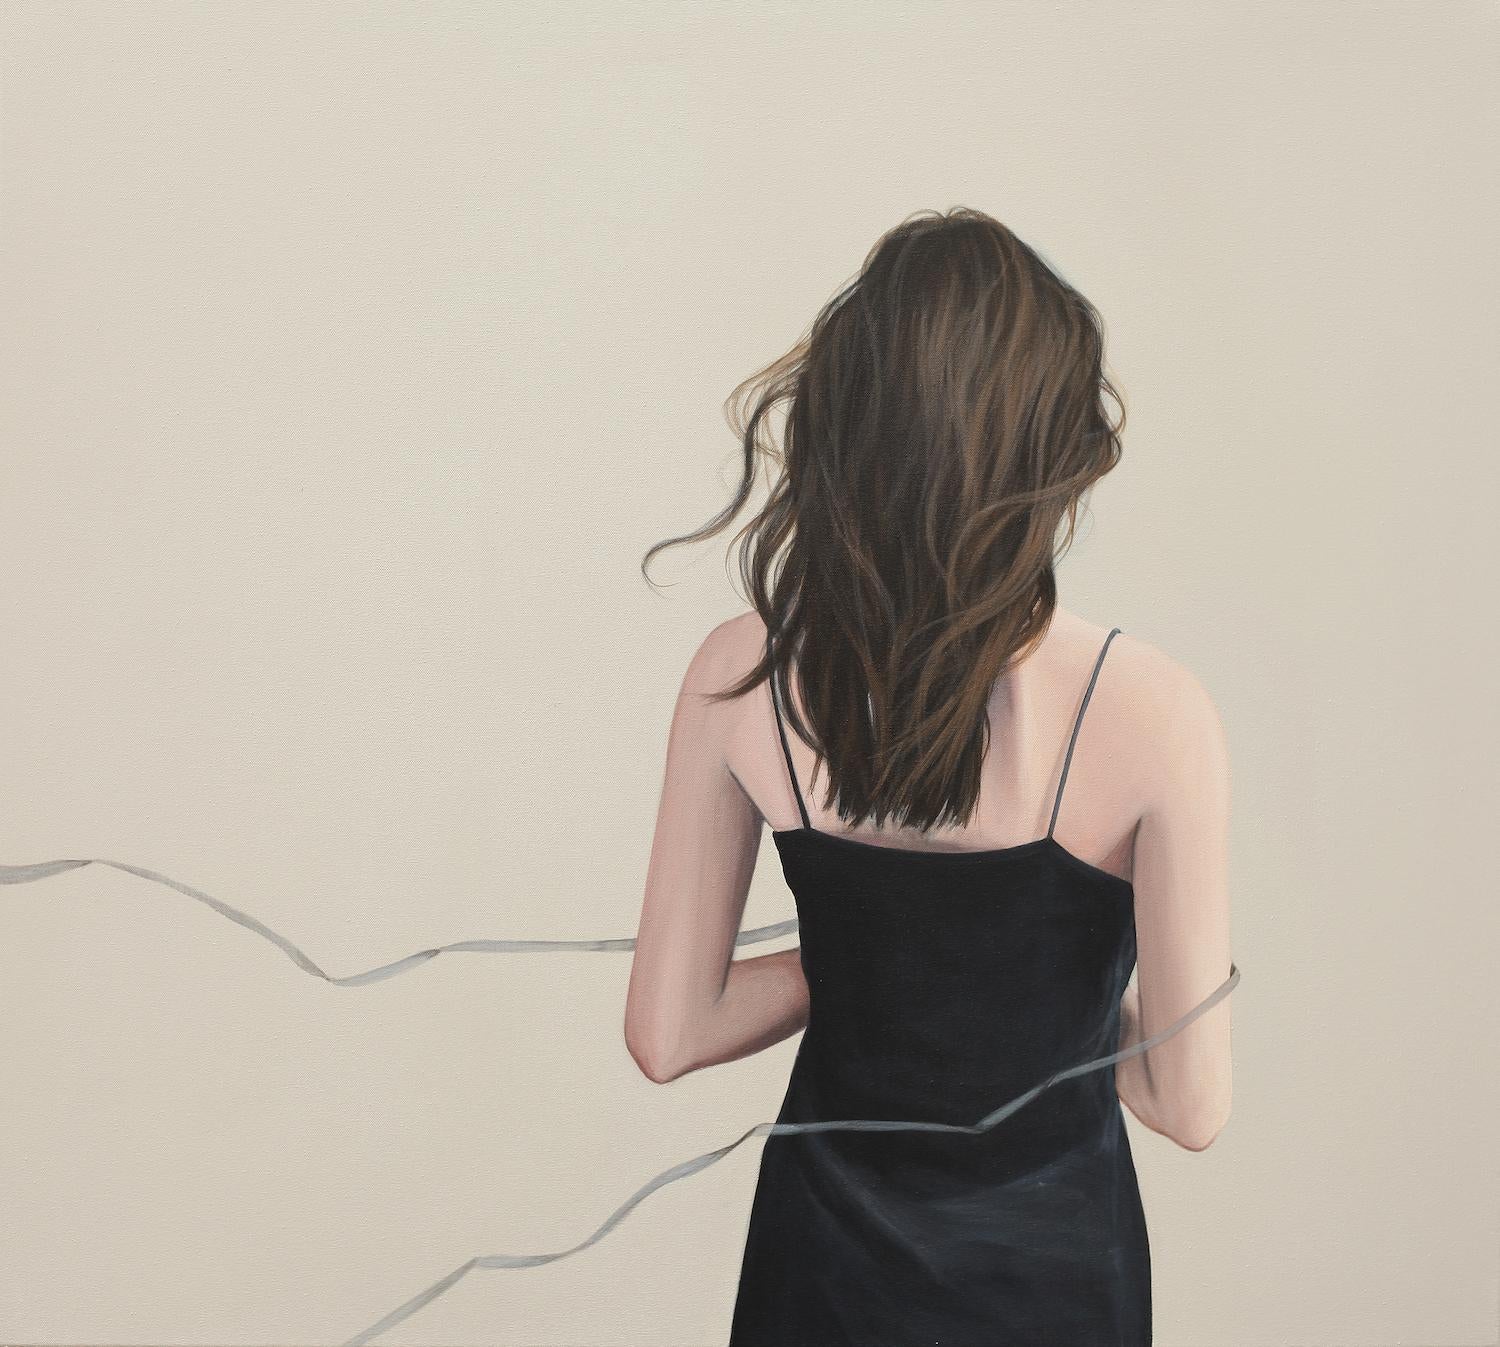 Karoline Kroiss Figurative Painting - ''You hear it too'' Contemporary Portrait of a Girl Embraced by a Silk Ribbon